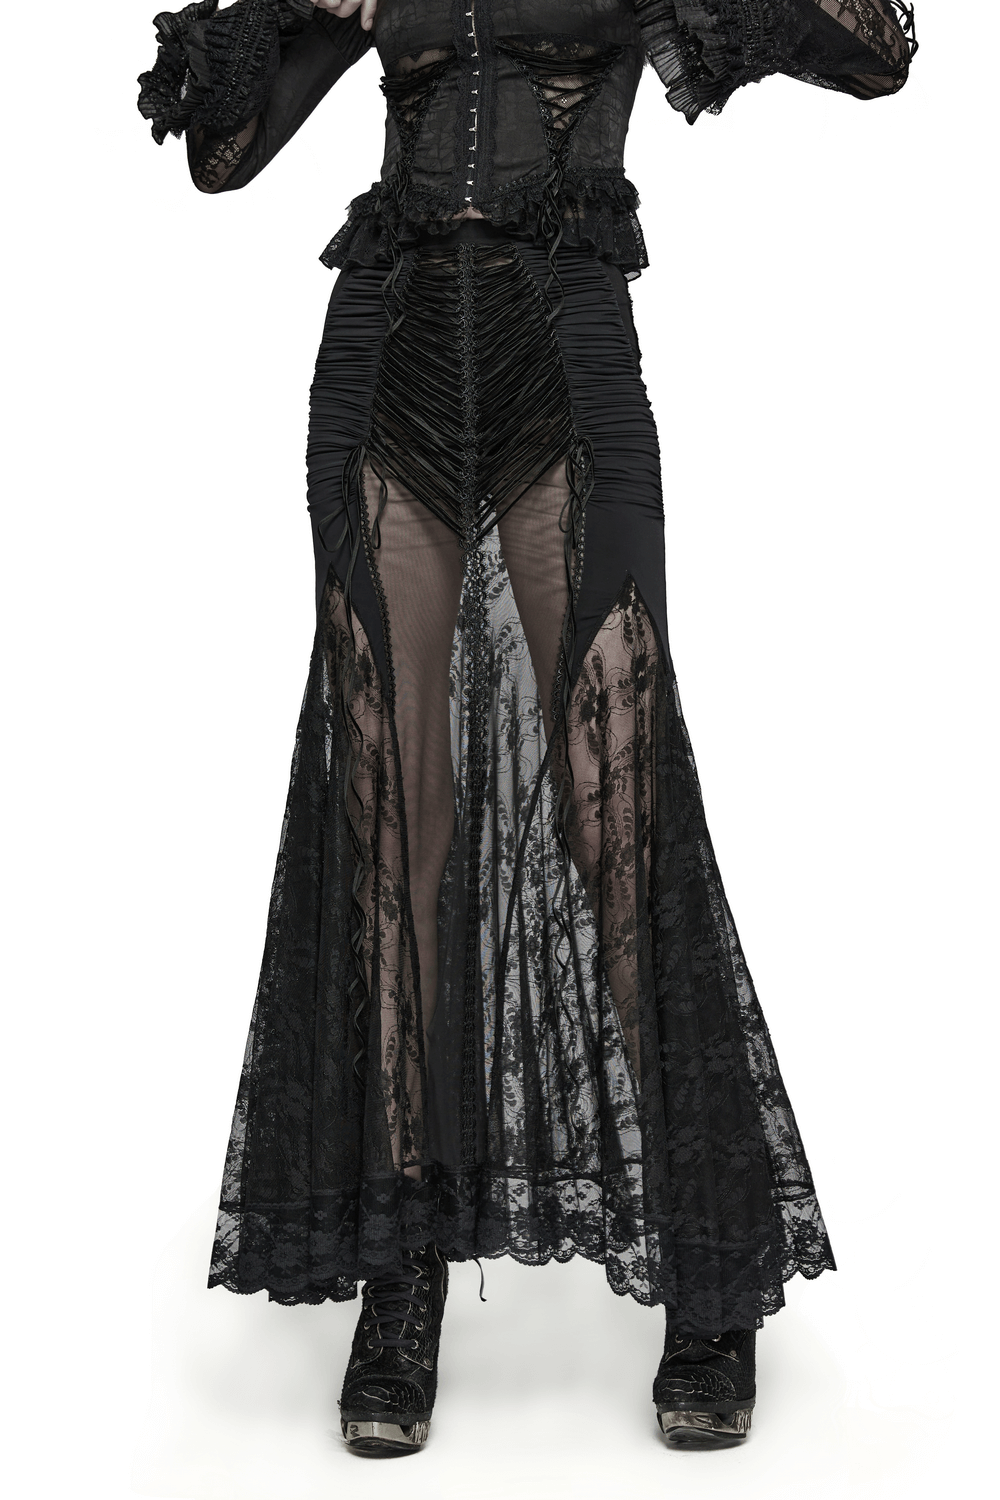 Gothic Lace Sheer Wrapped Long Slim Skirt for Women